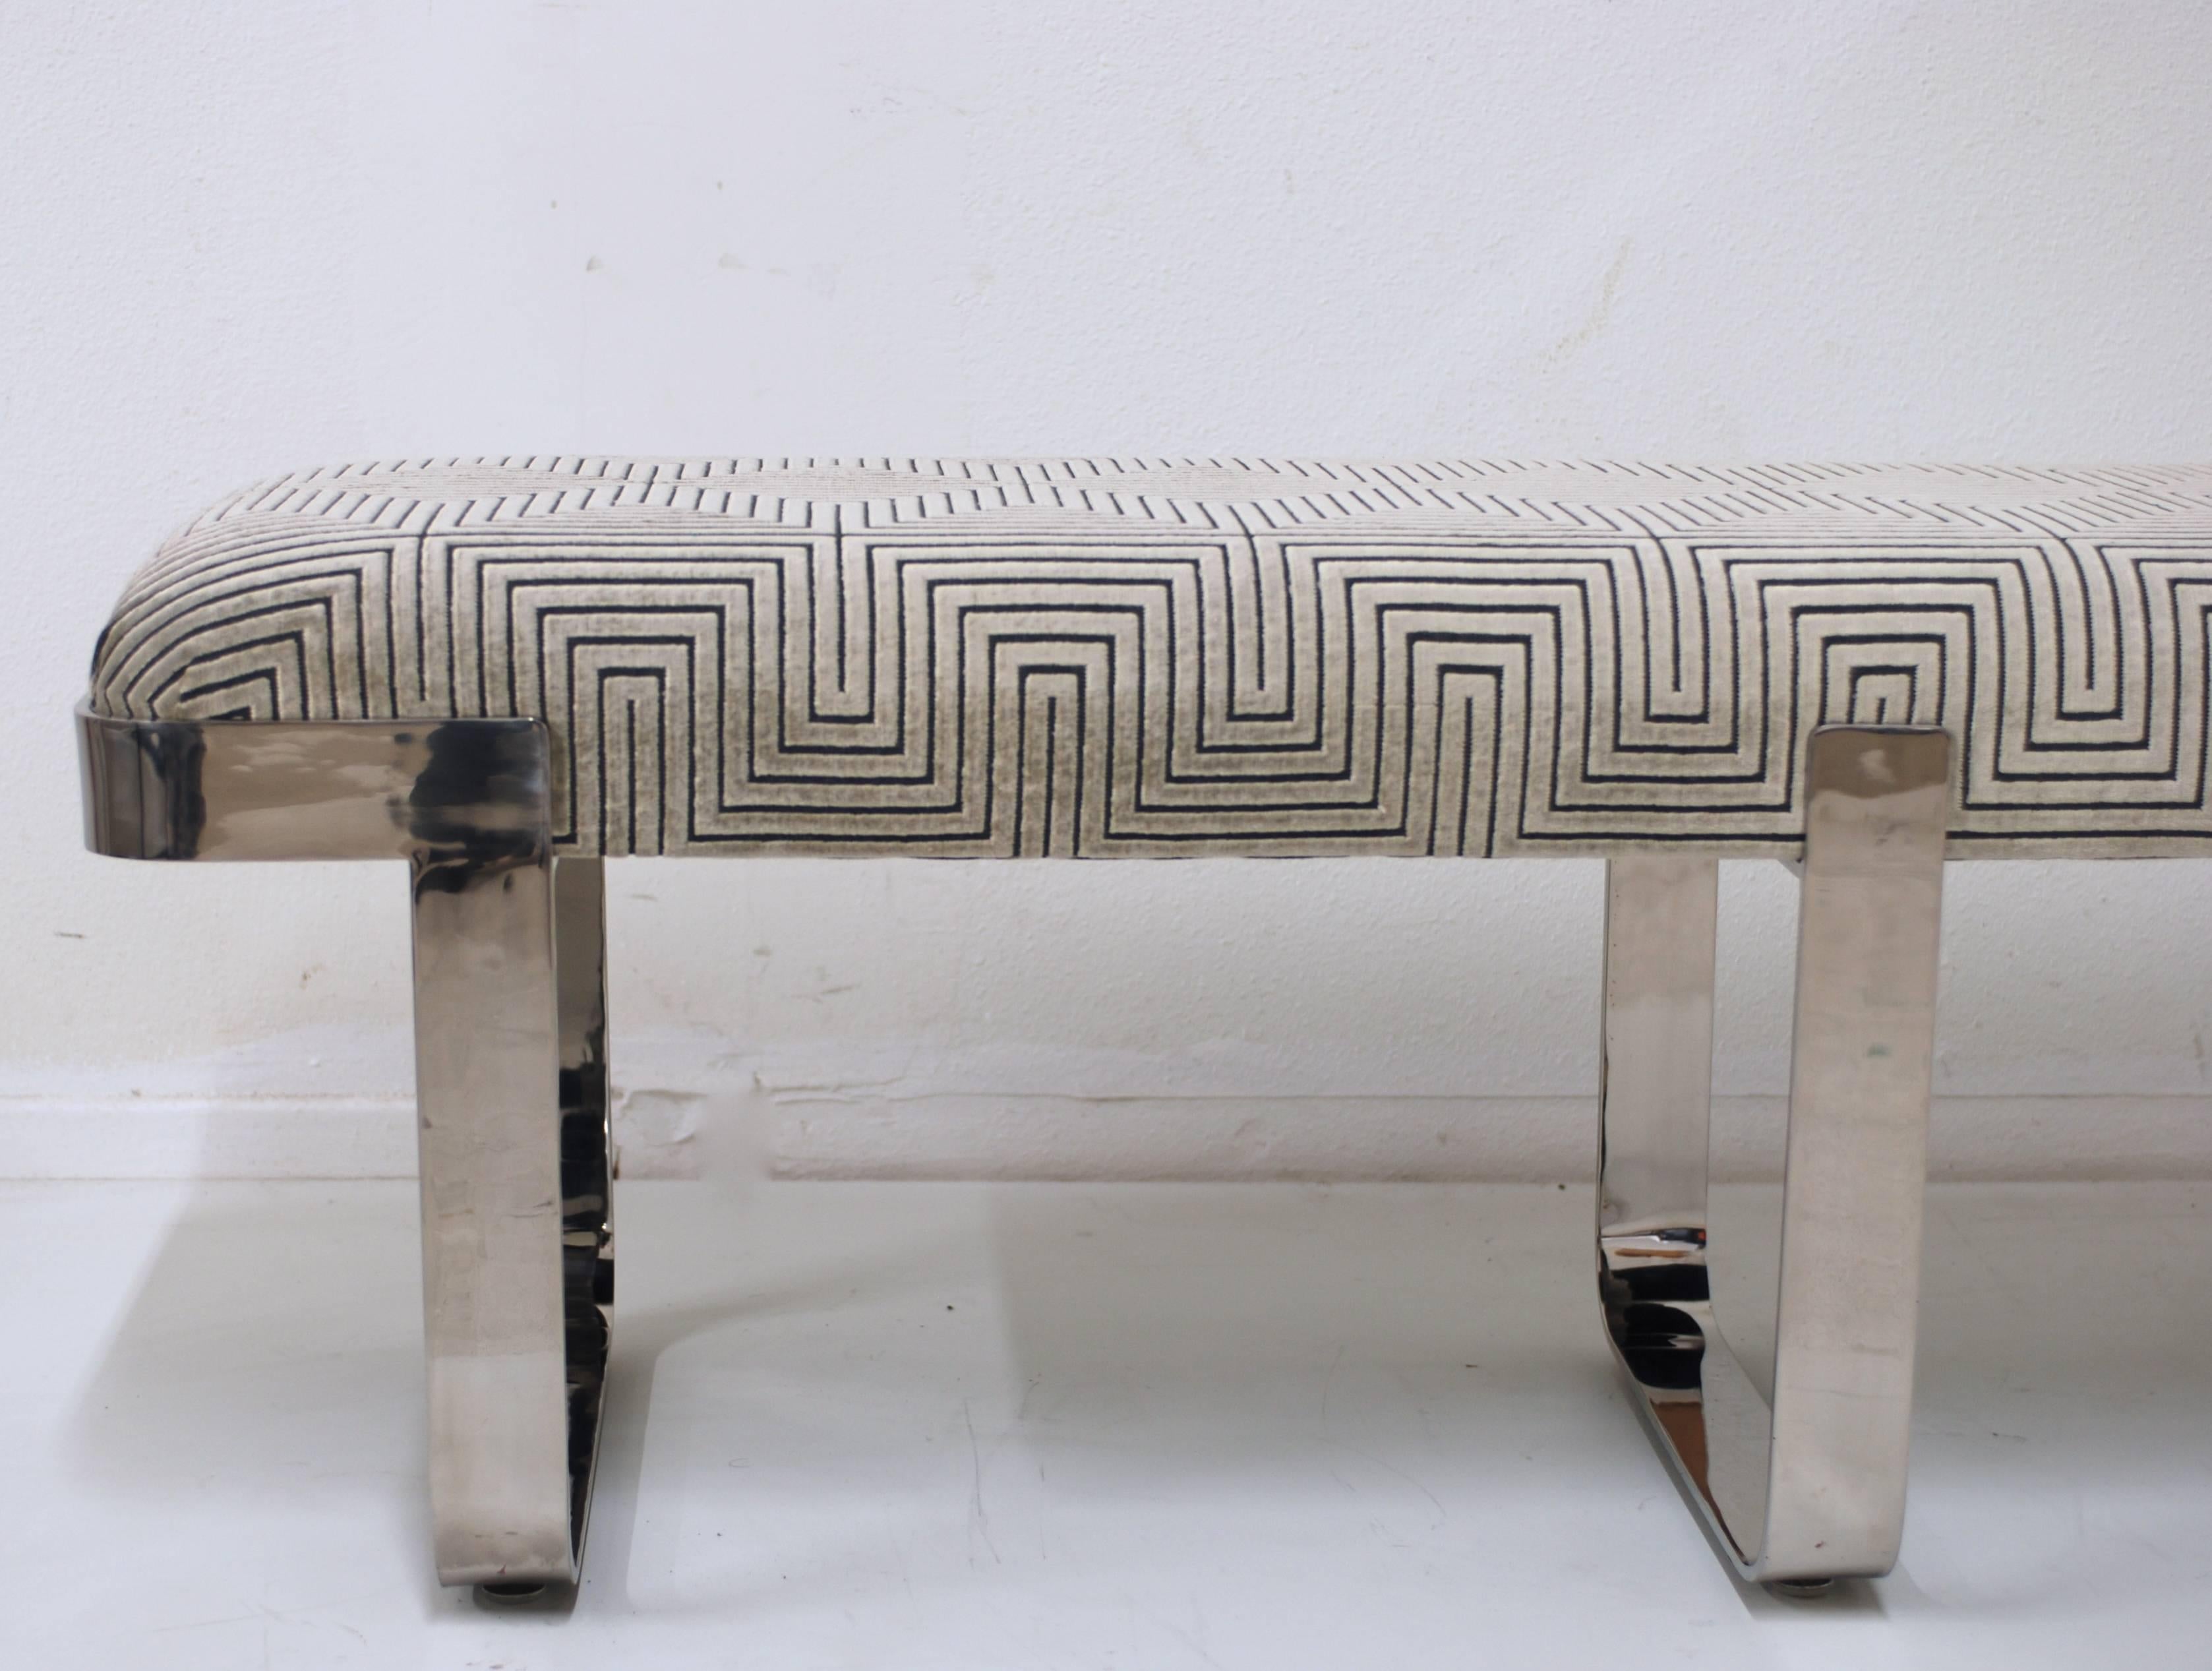 This vintage 1970s era Mid-Century Modern bench has been freshly upholstered in a luxe cut velvet. The geometric pattern has a raised platinum silver velvet on a grey background. The polished chrome base is in excellent vintage condition with only